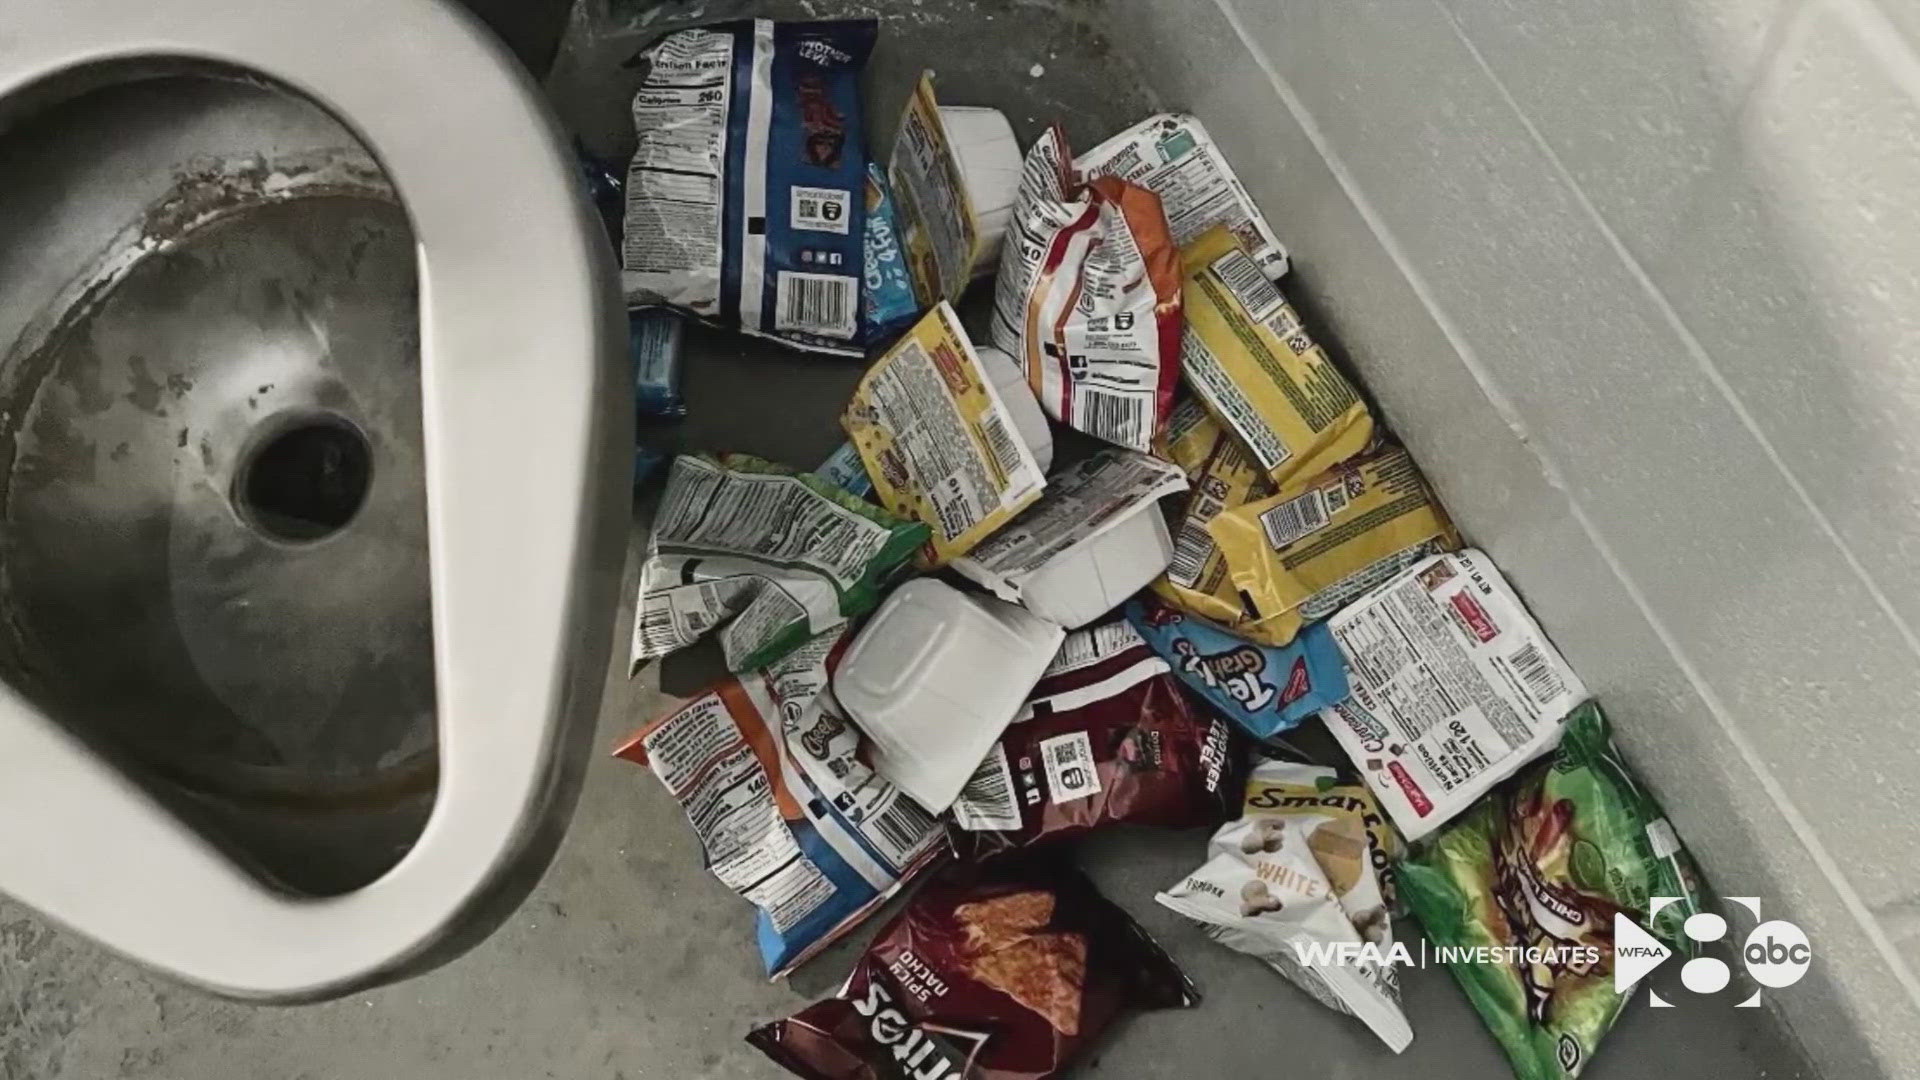 Photos from inside cells show piles of trash, clogged toilets, and staffing shortages at the Dallas County Juvenile Detention Center.